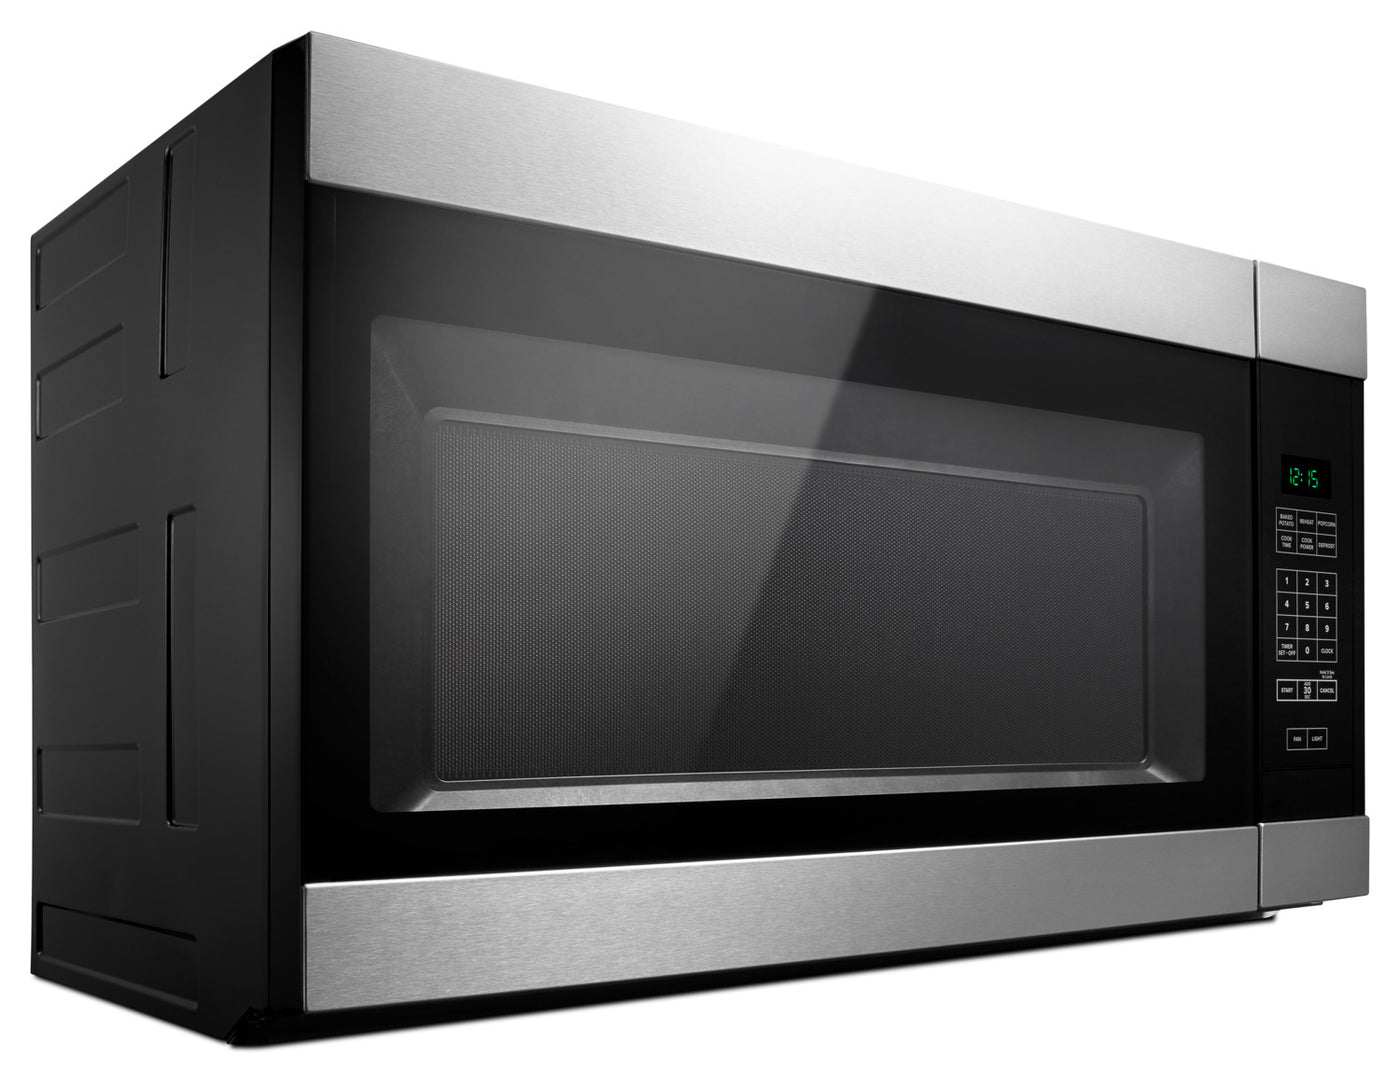 Amana Stainless Steel Over-the-Range Microwave (1.6 Cu. Ft.) - YAMV2307PFS